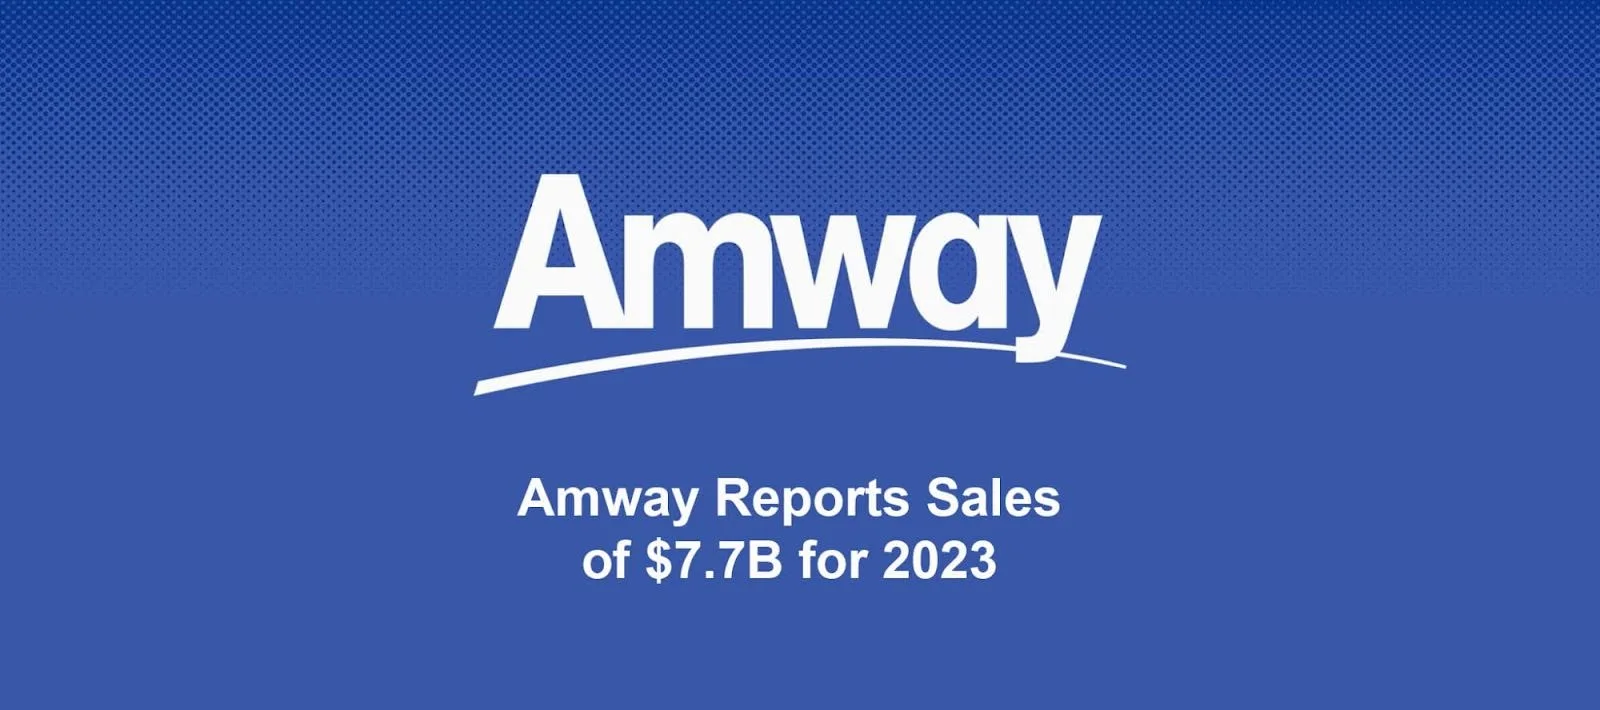 Amway reports sales of $7.7 Billion for 2023.